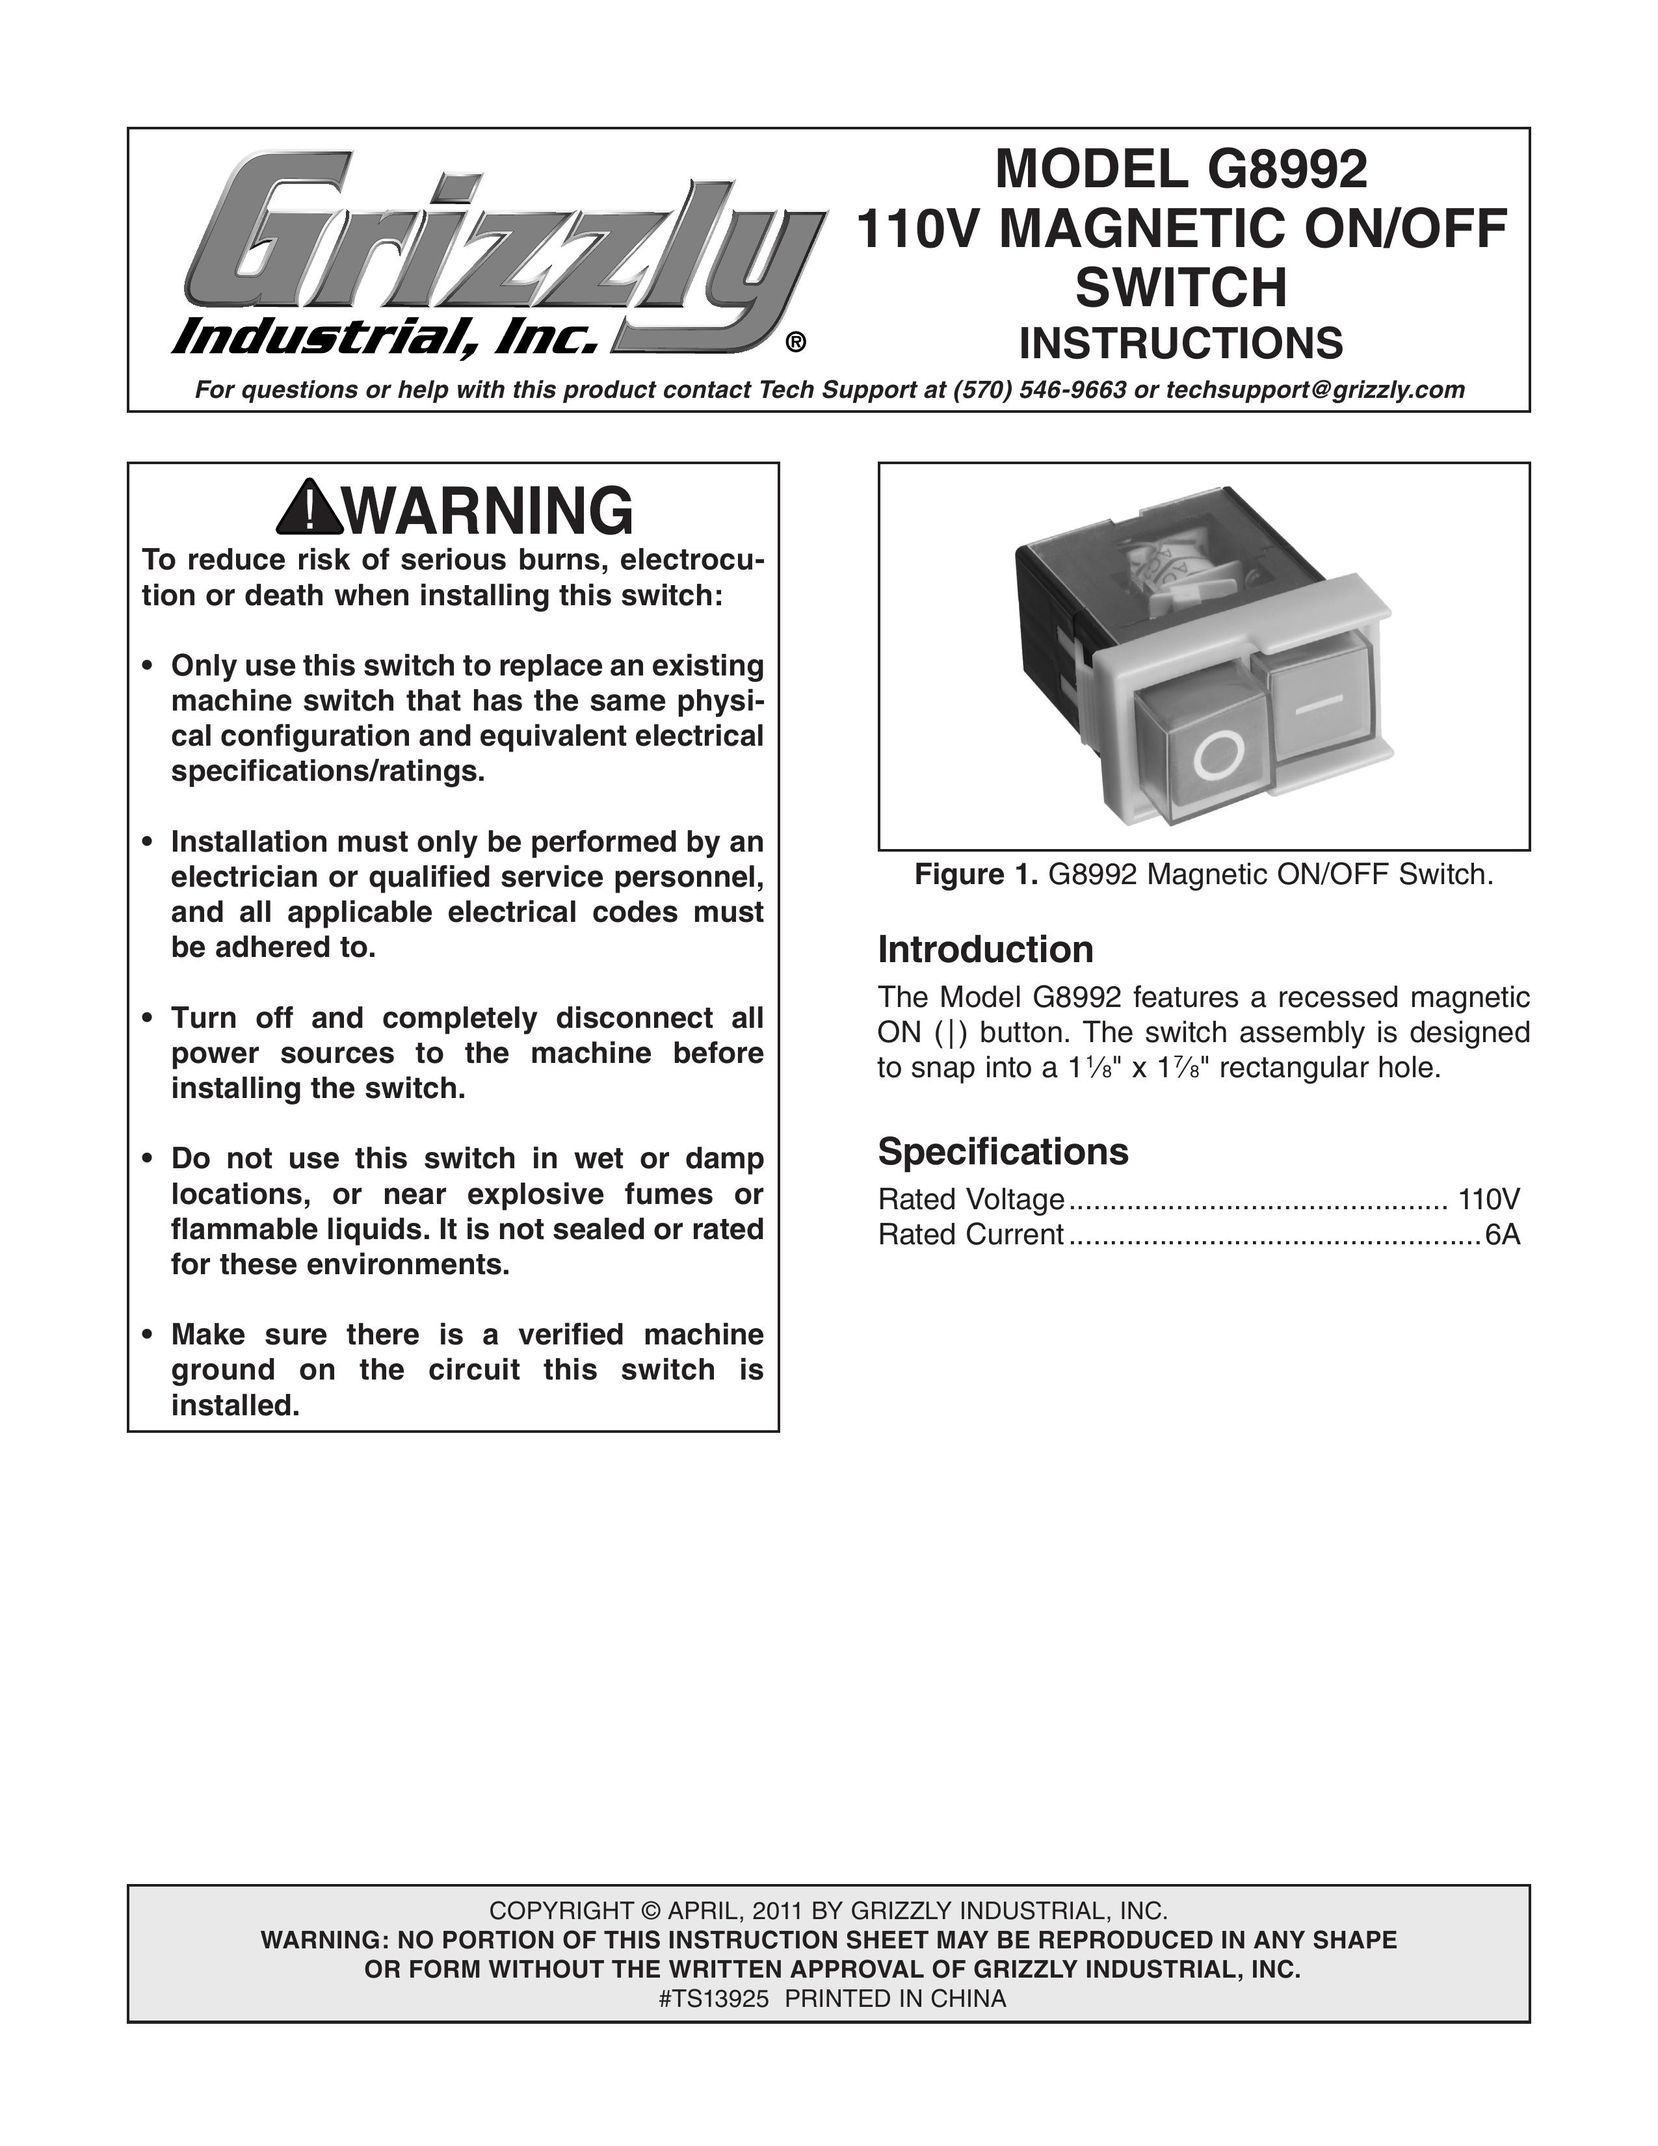 Grizzly G8992 Switch User Manual